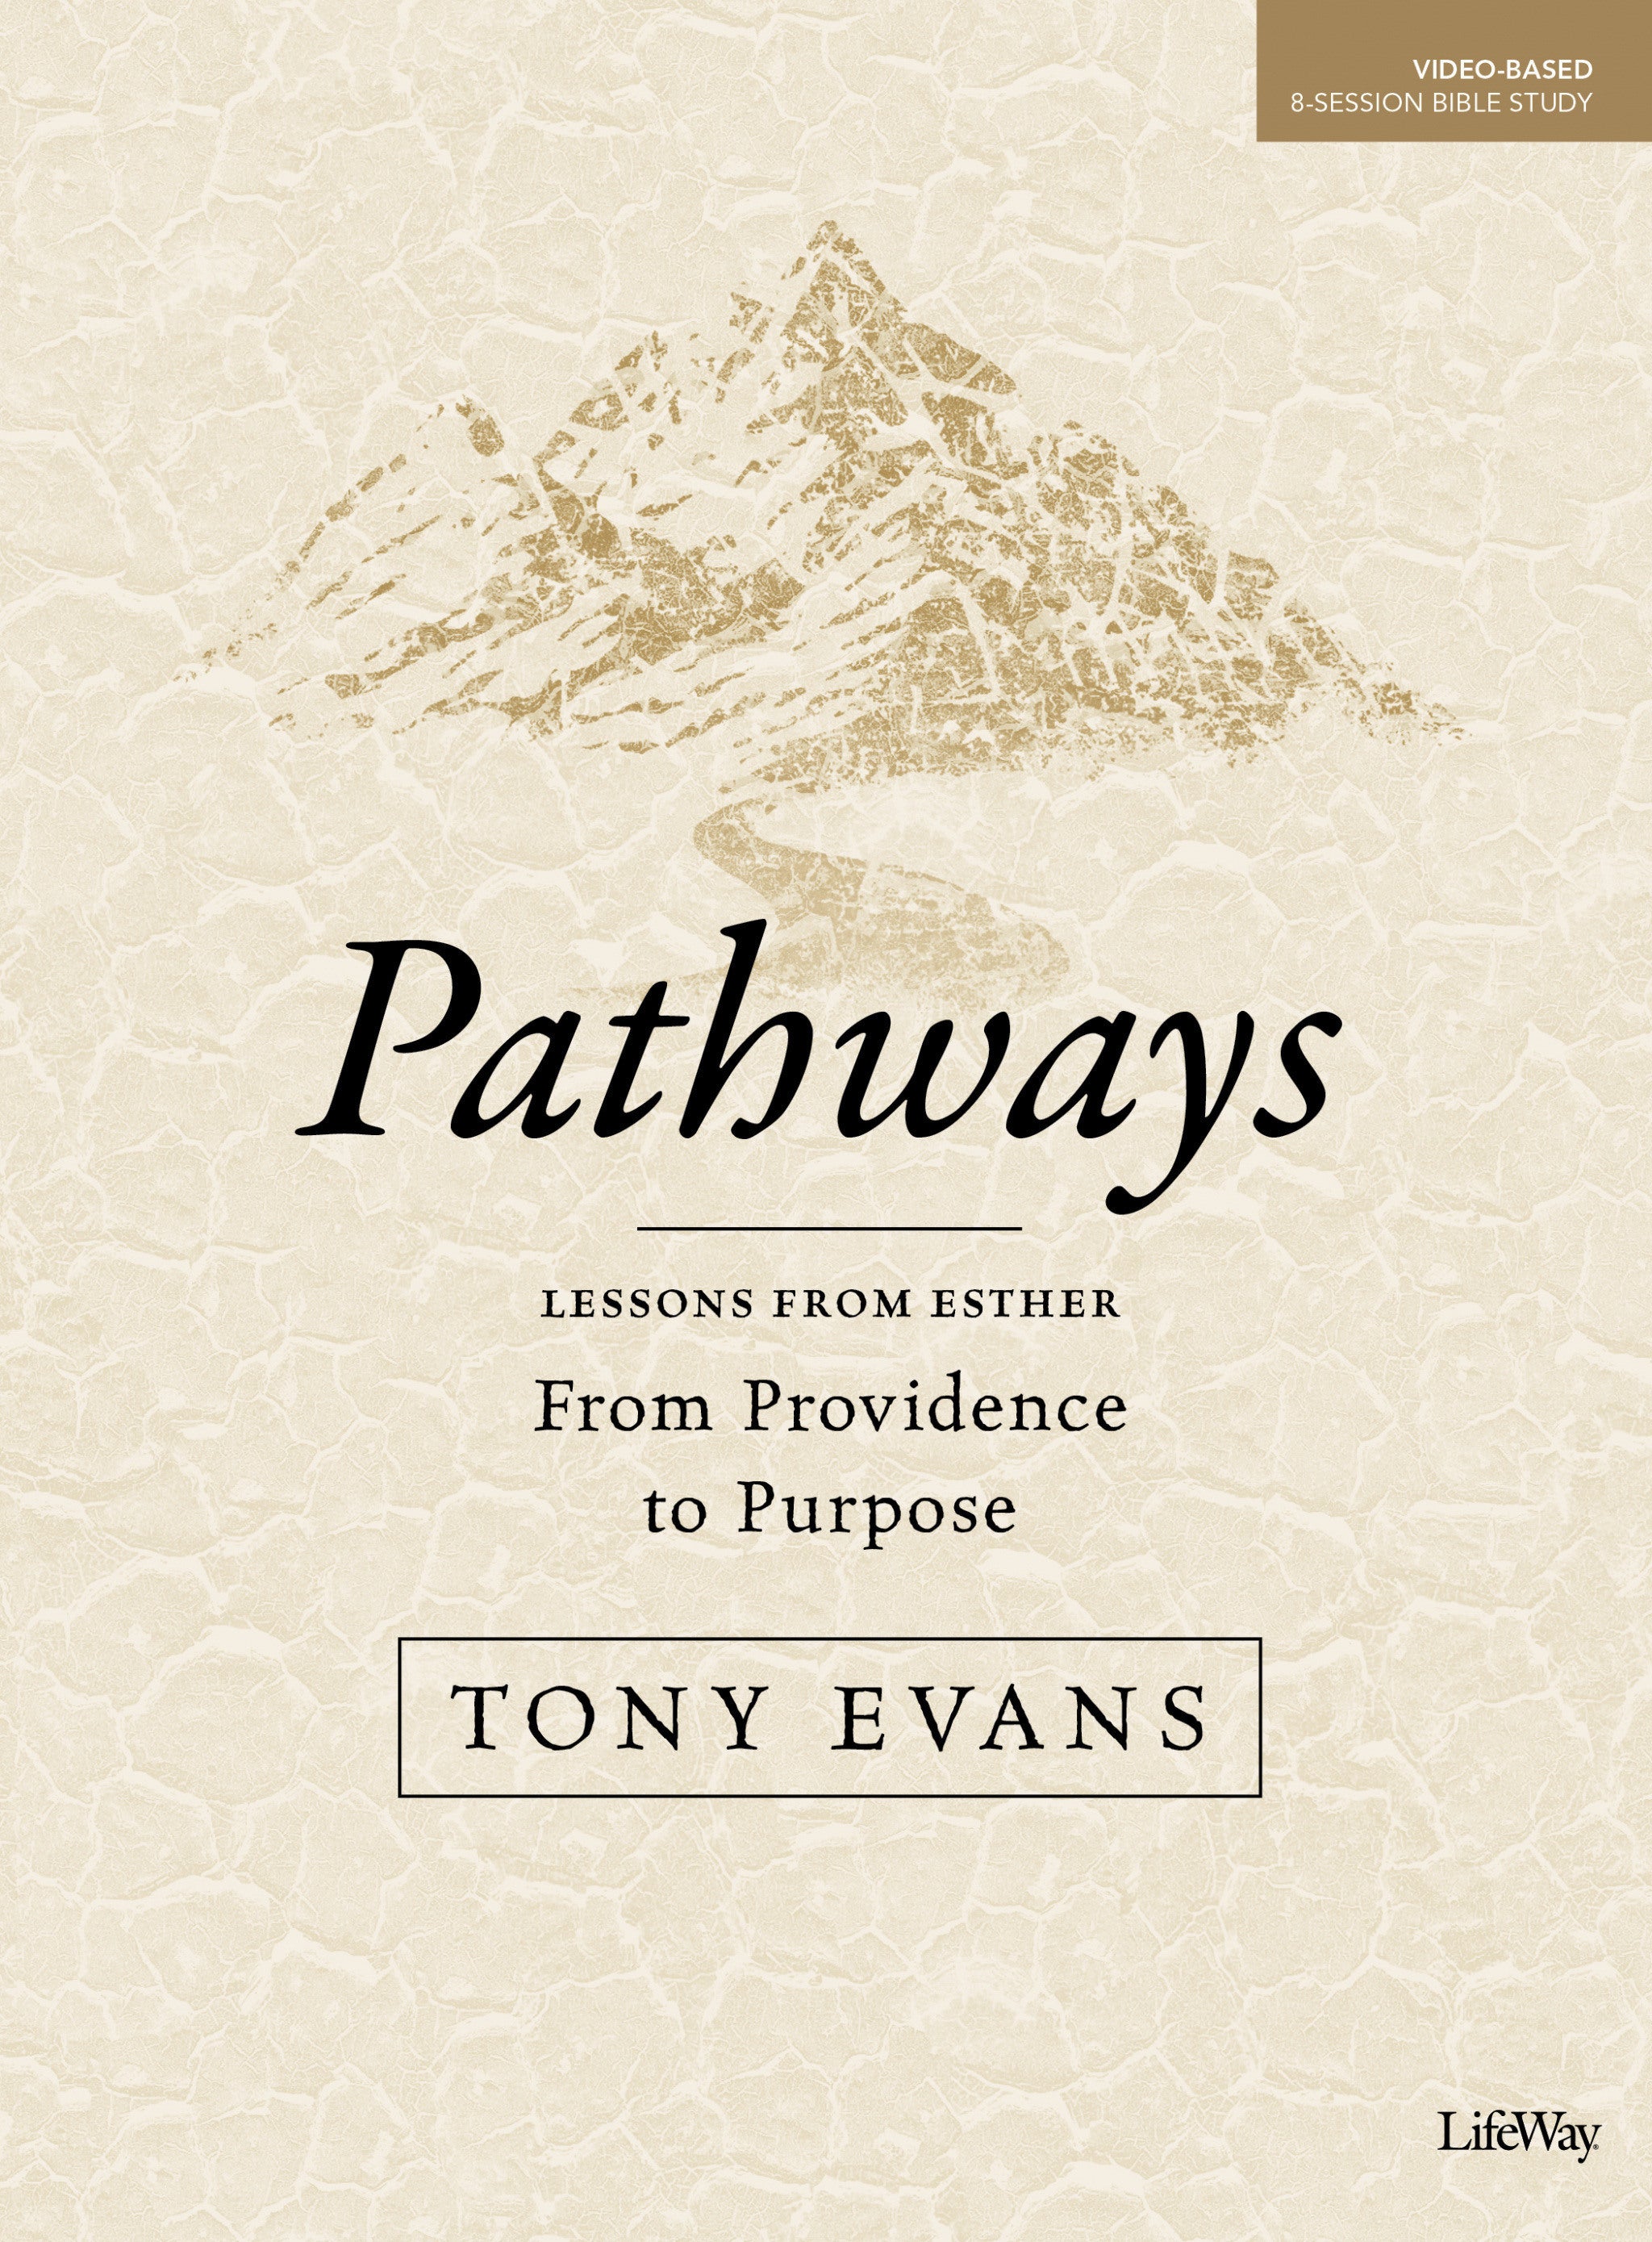 Image of Pathways - Bible Study Book: From Providence to Purpose other